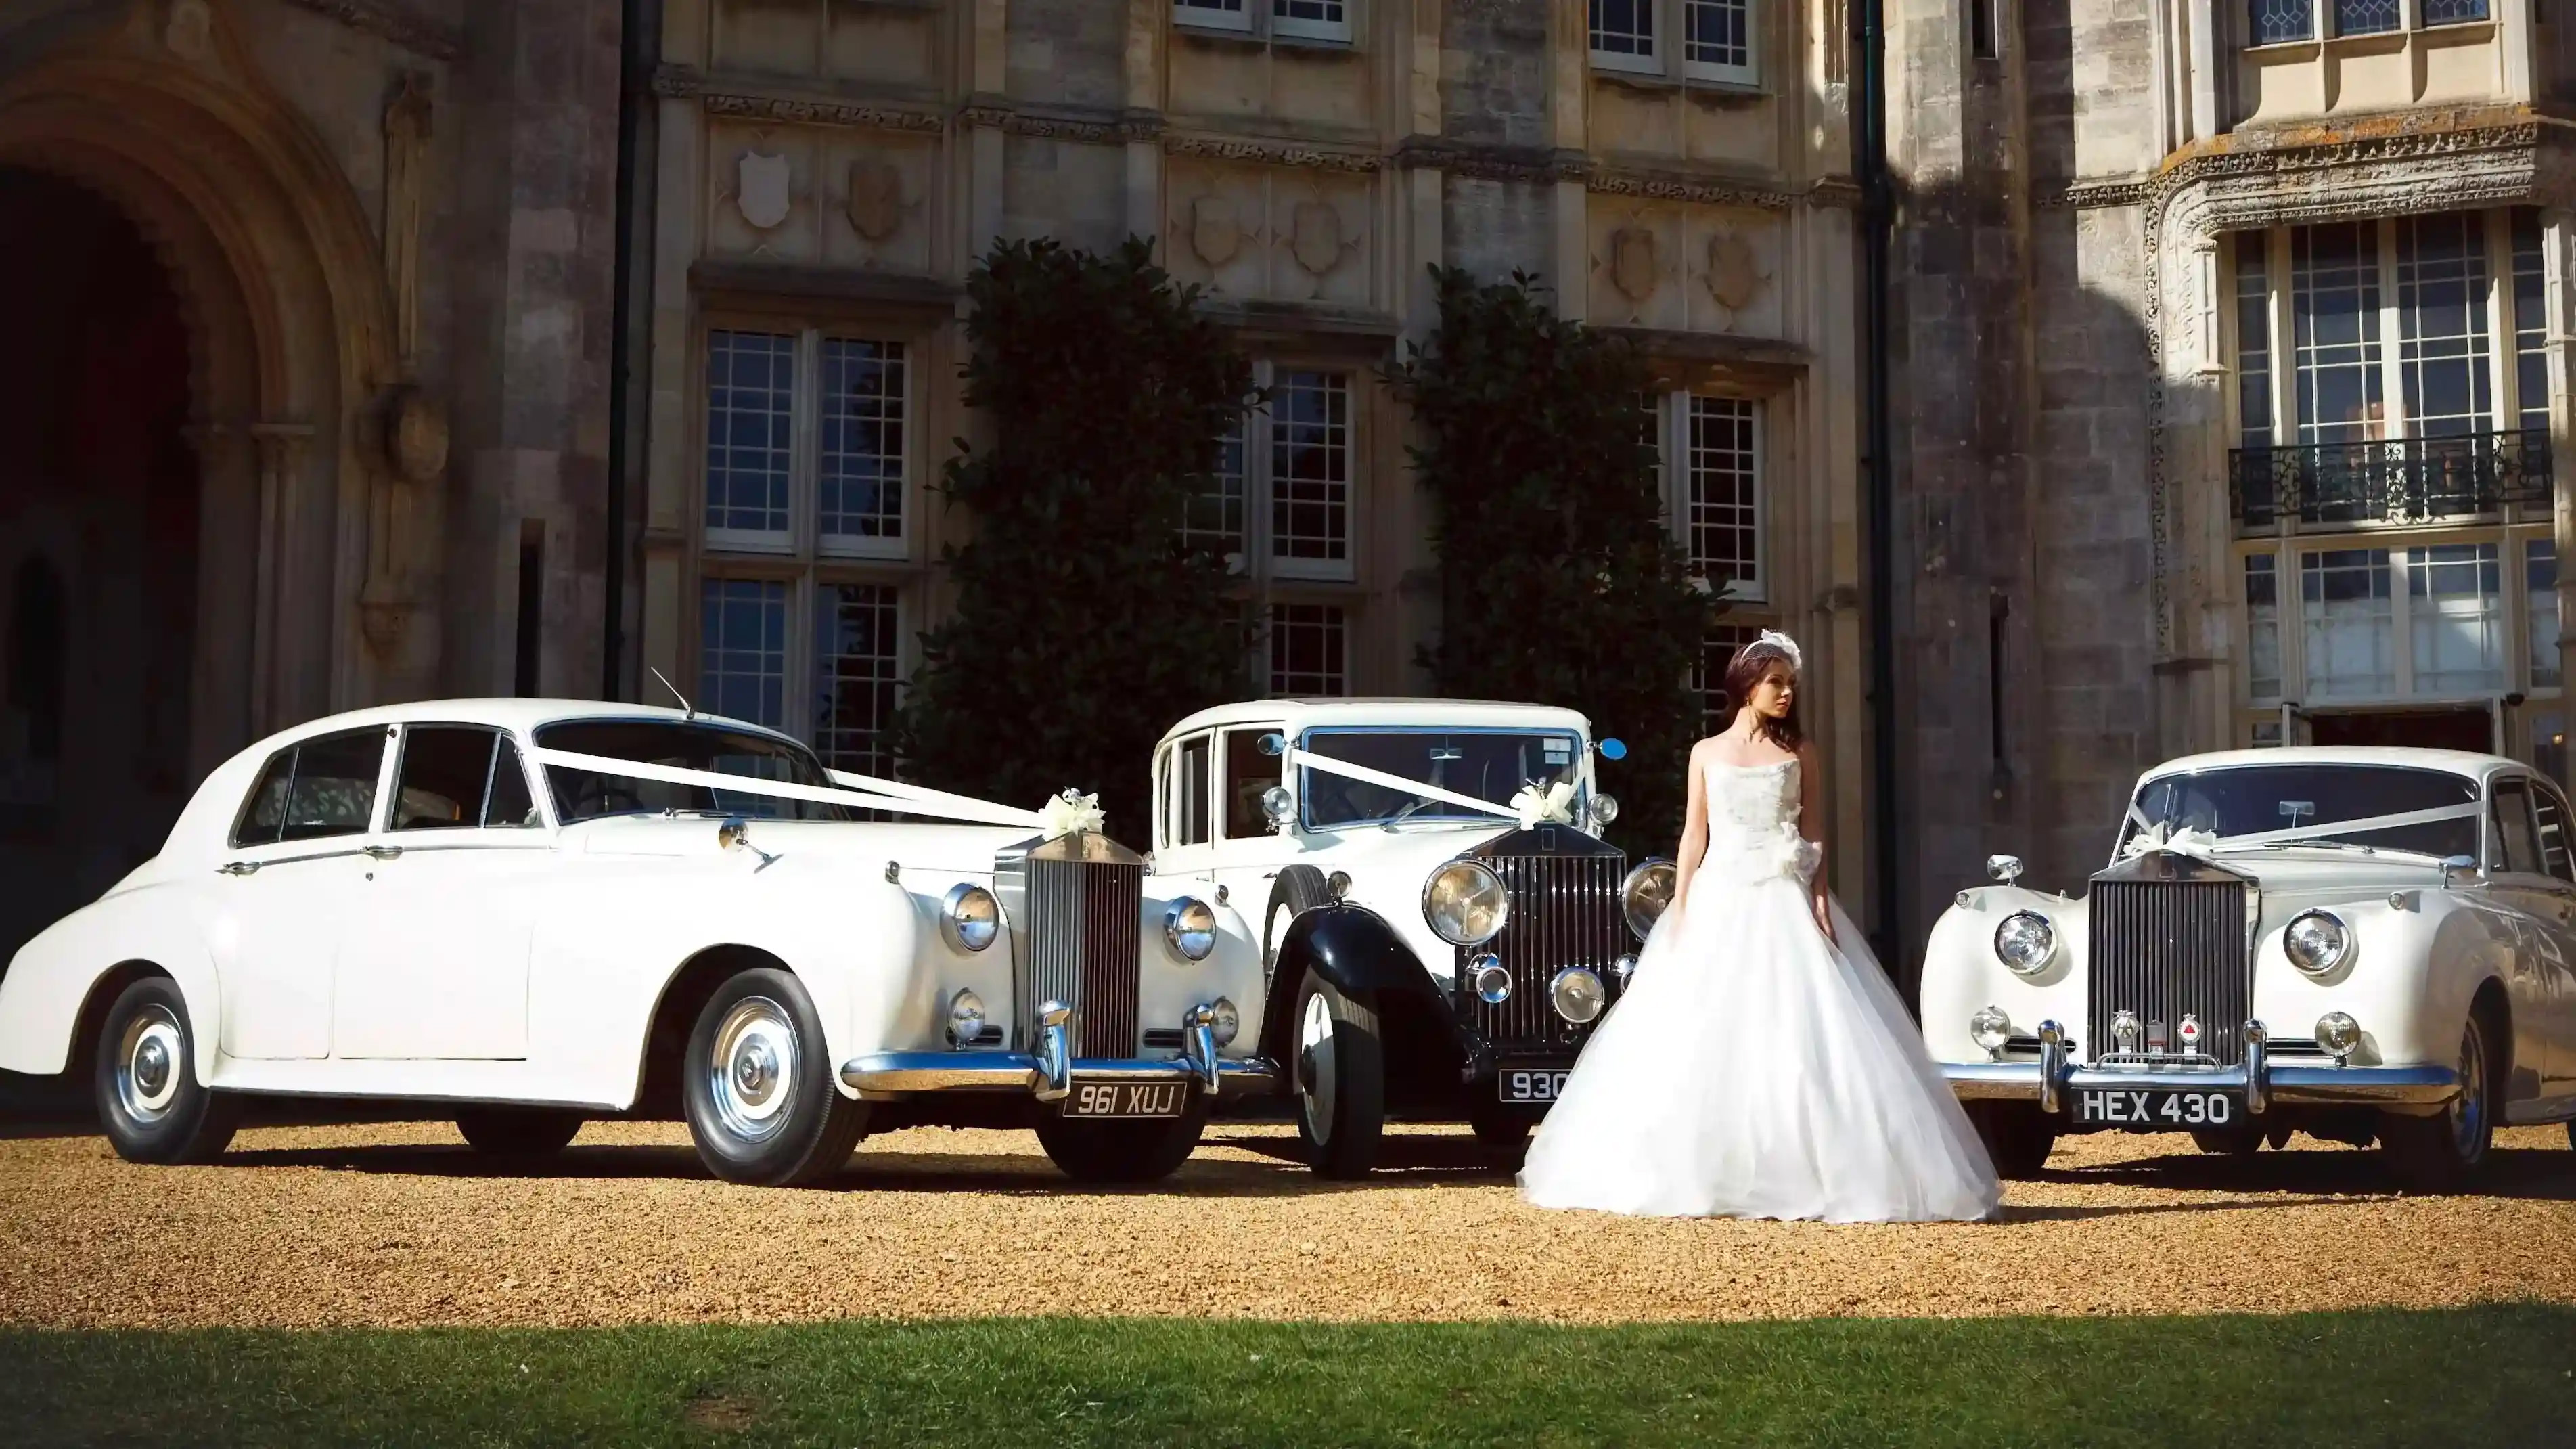 Selection of three classic and Vintage Rolls-Royce in White with Bride wearing a white wedding dress standing in the middle of the vehicles. Background is a popular wedding venue in the style of a castle in Surrey.